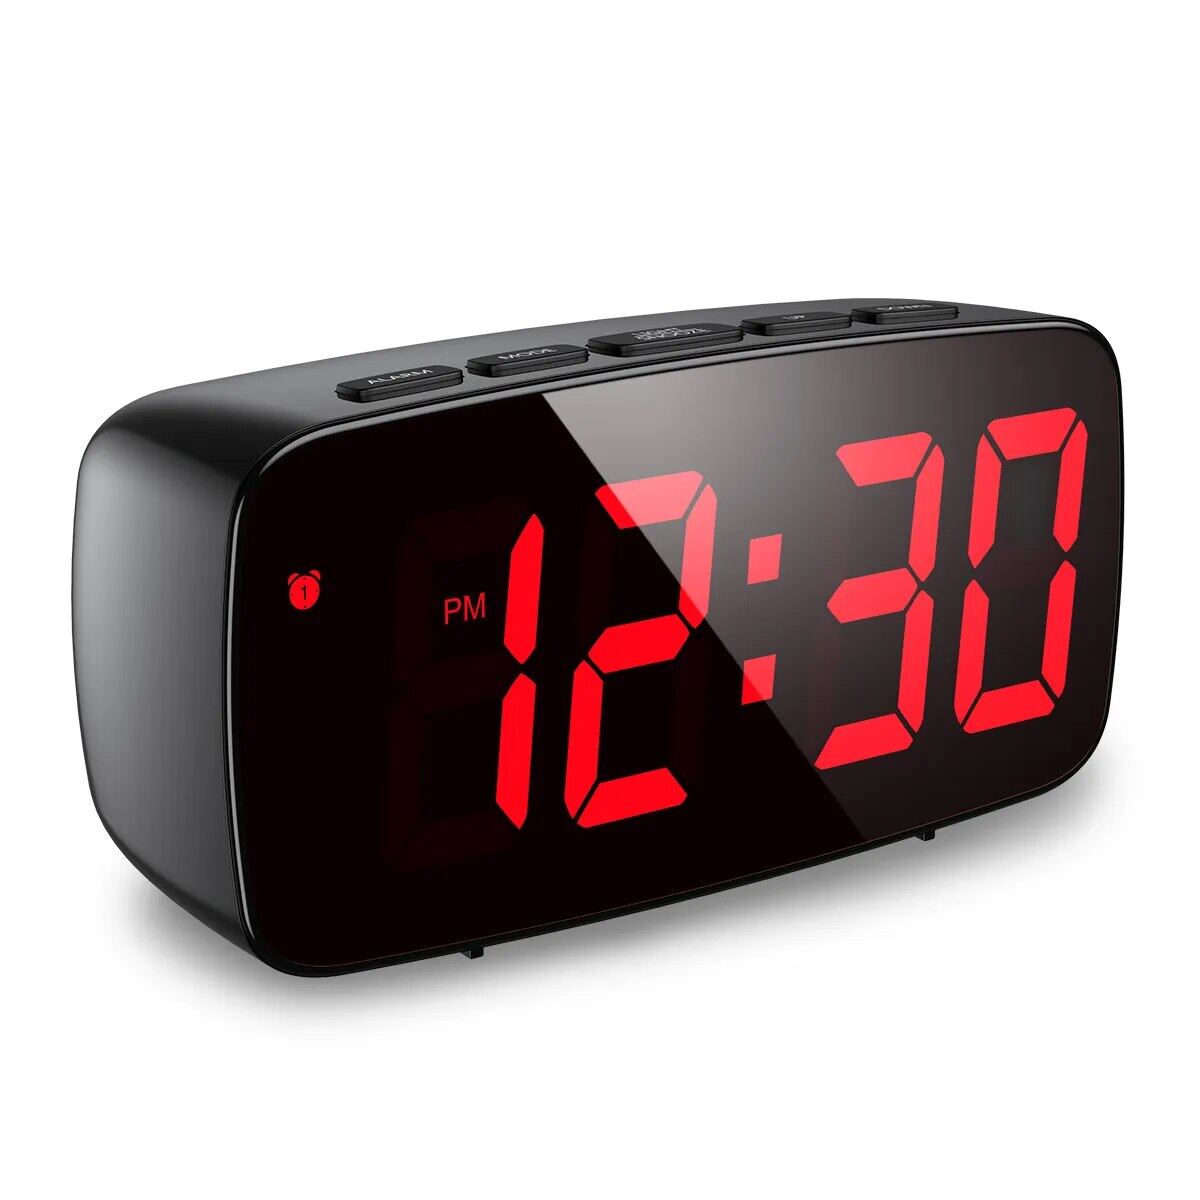 Clock with Voice control, red light